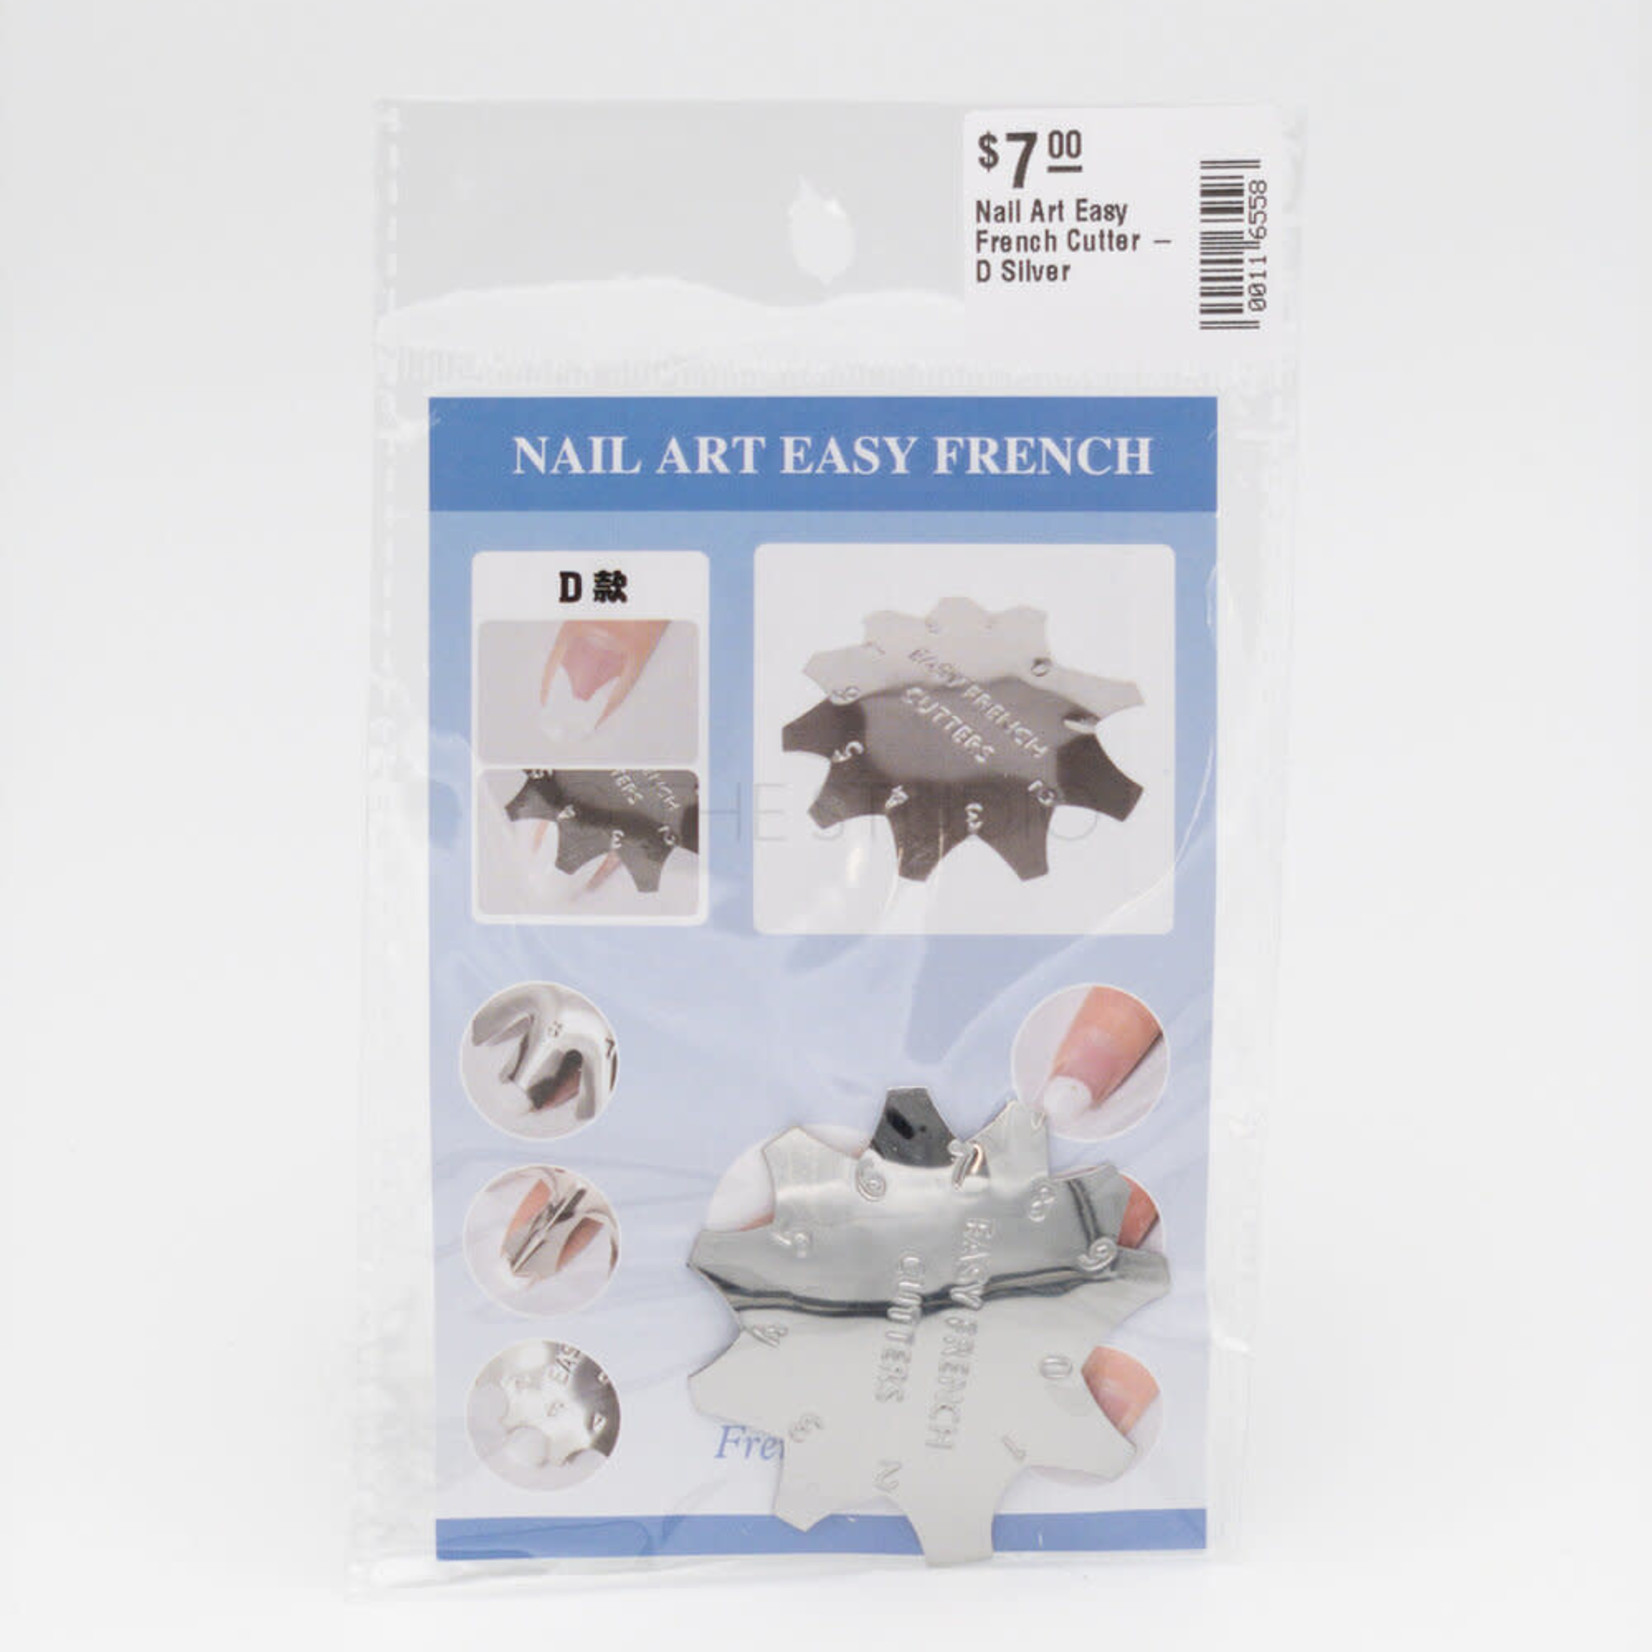 The Studio Nail Art Easy French Cutter - D